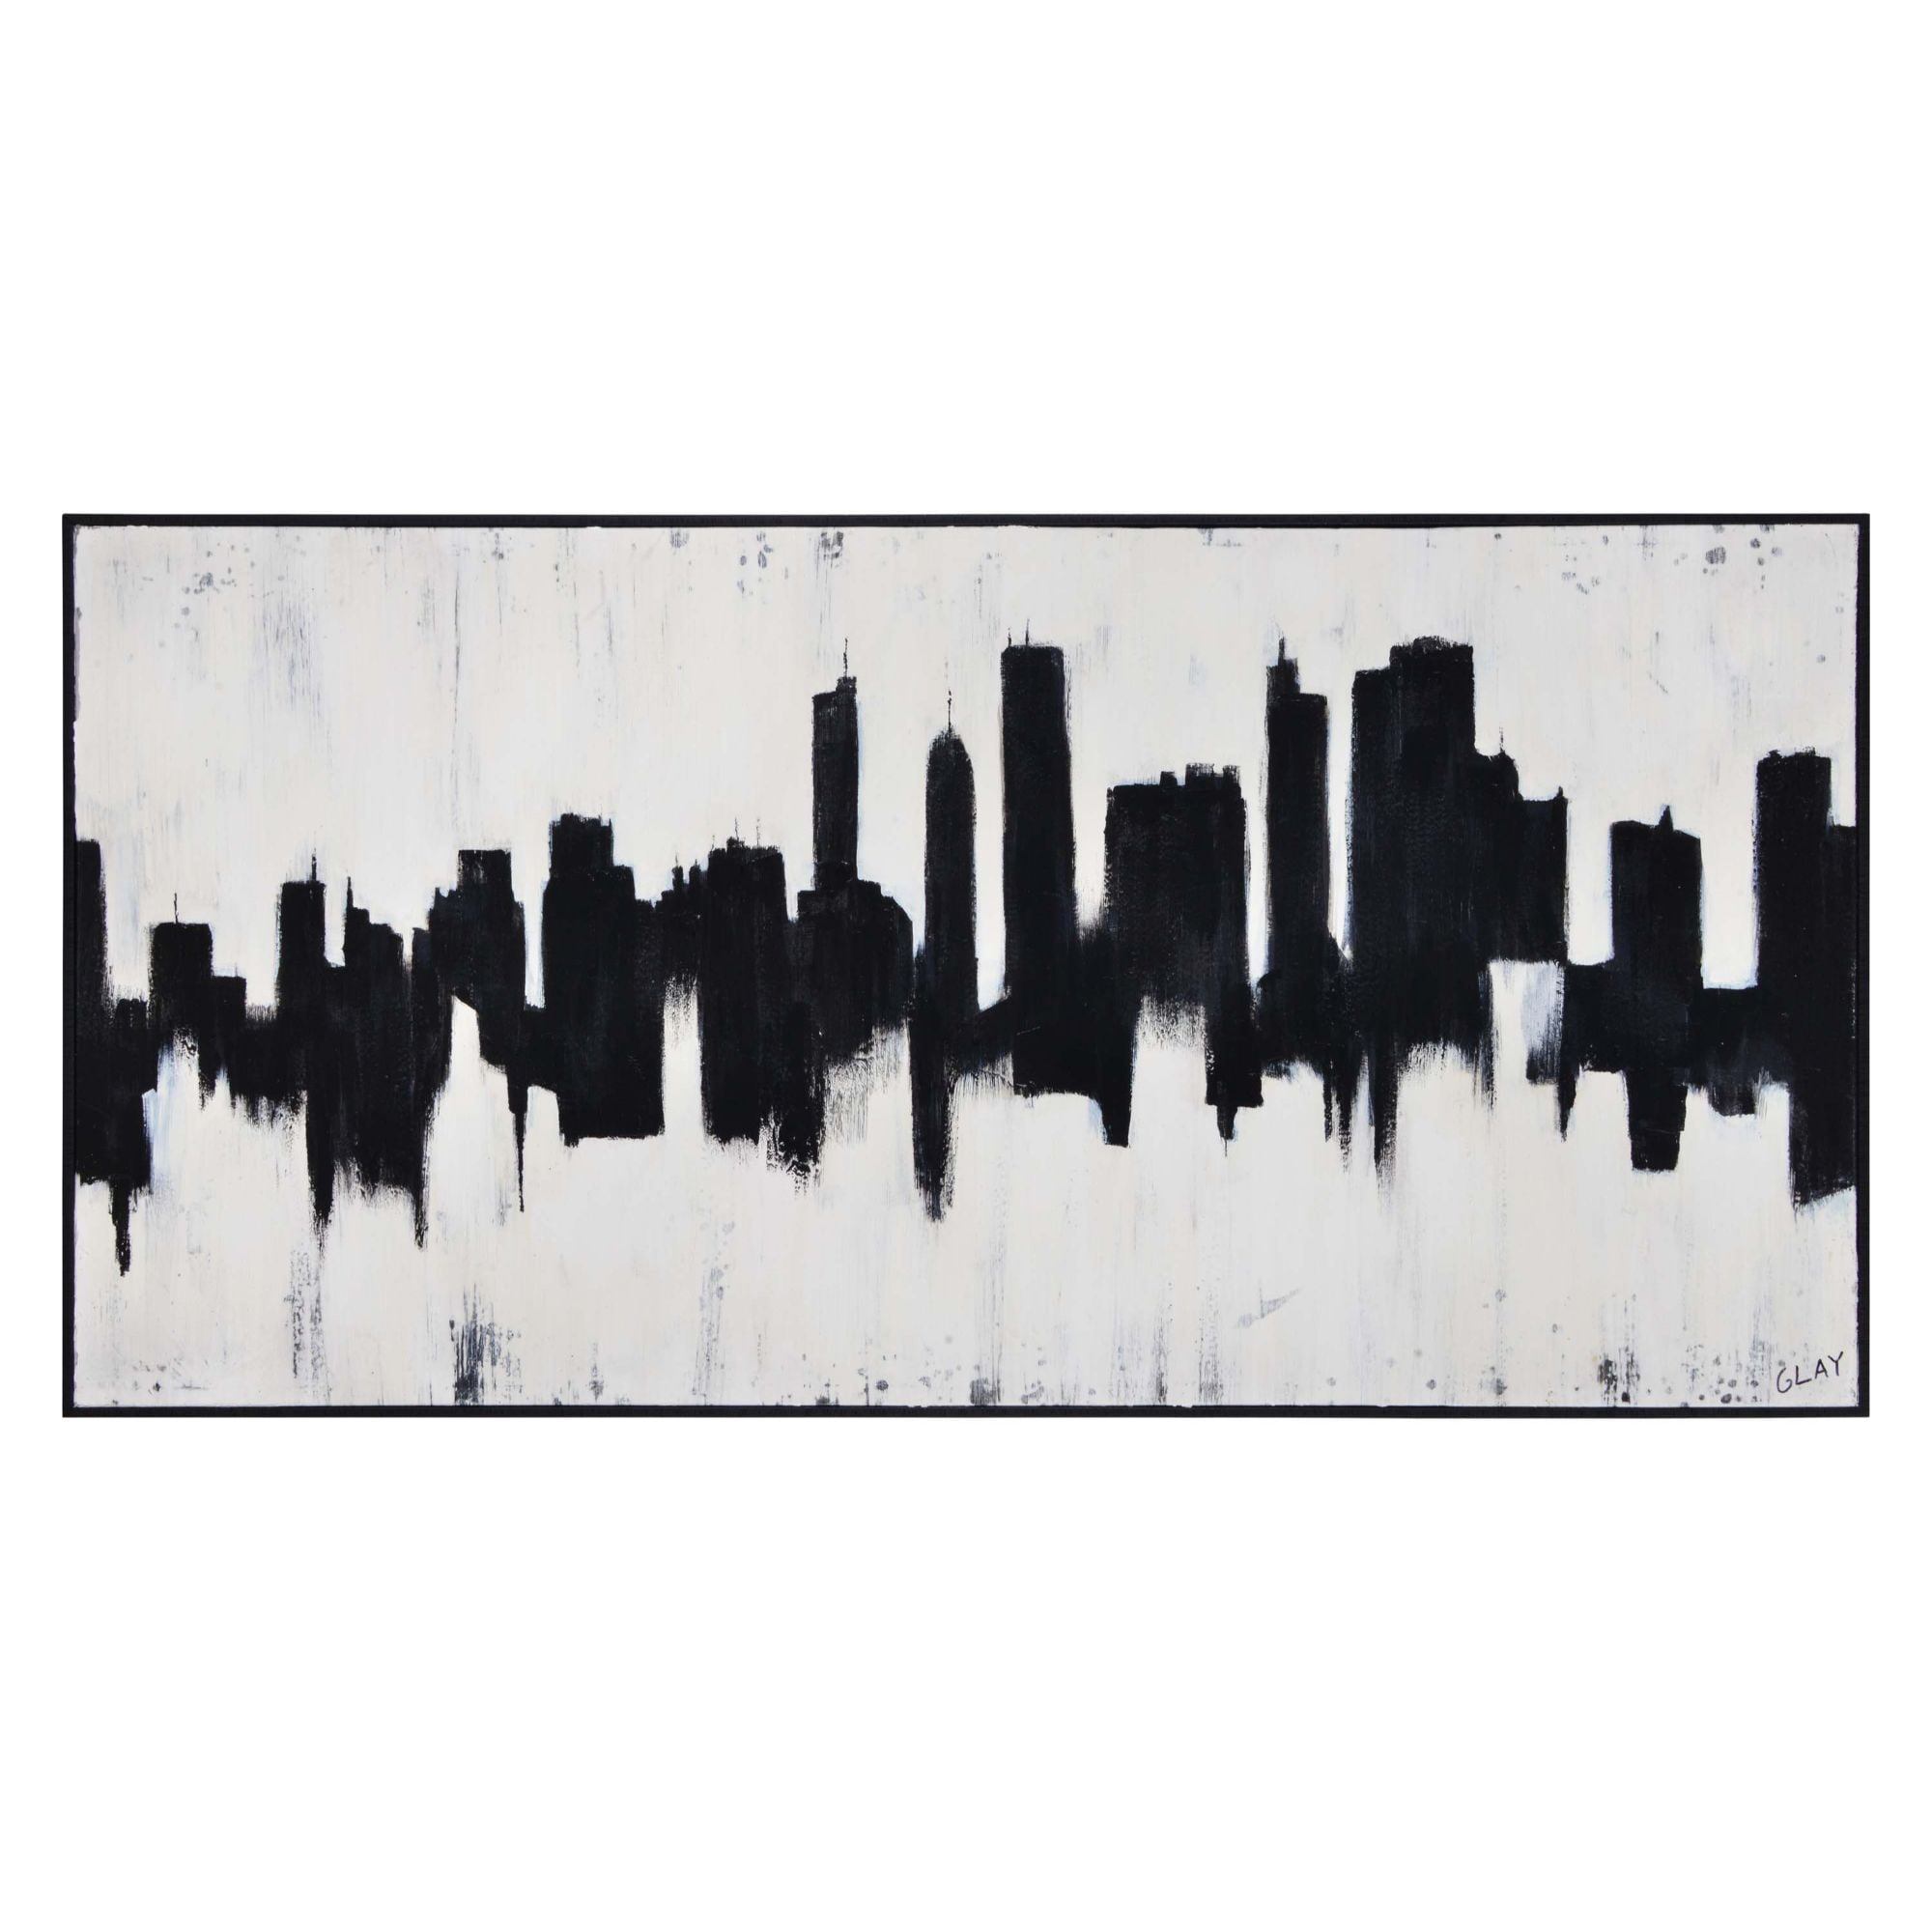 Black and White | Premium Wood Handmade Wall Sculpture - Limited Edition 55 x 27 XXL / Waves